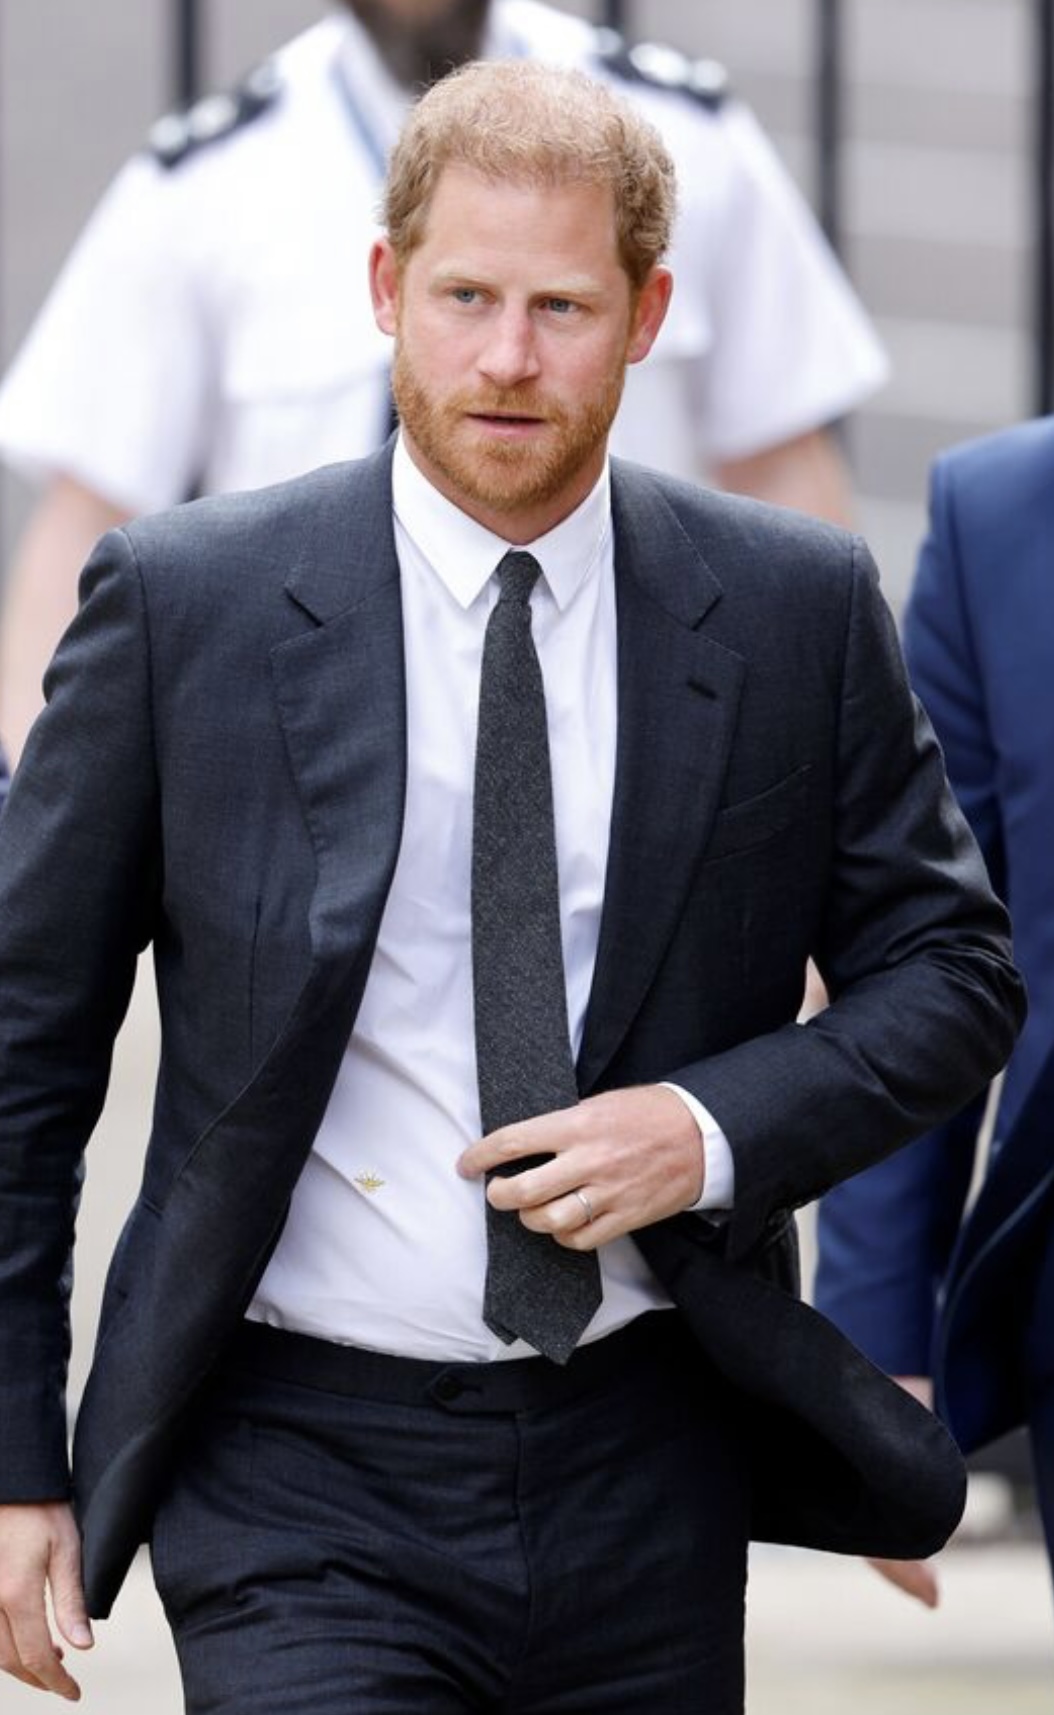 Prince Harry legal battle continues 1